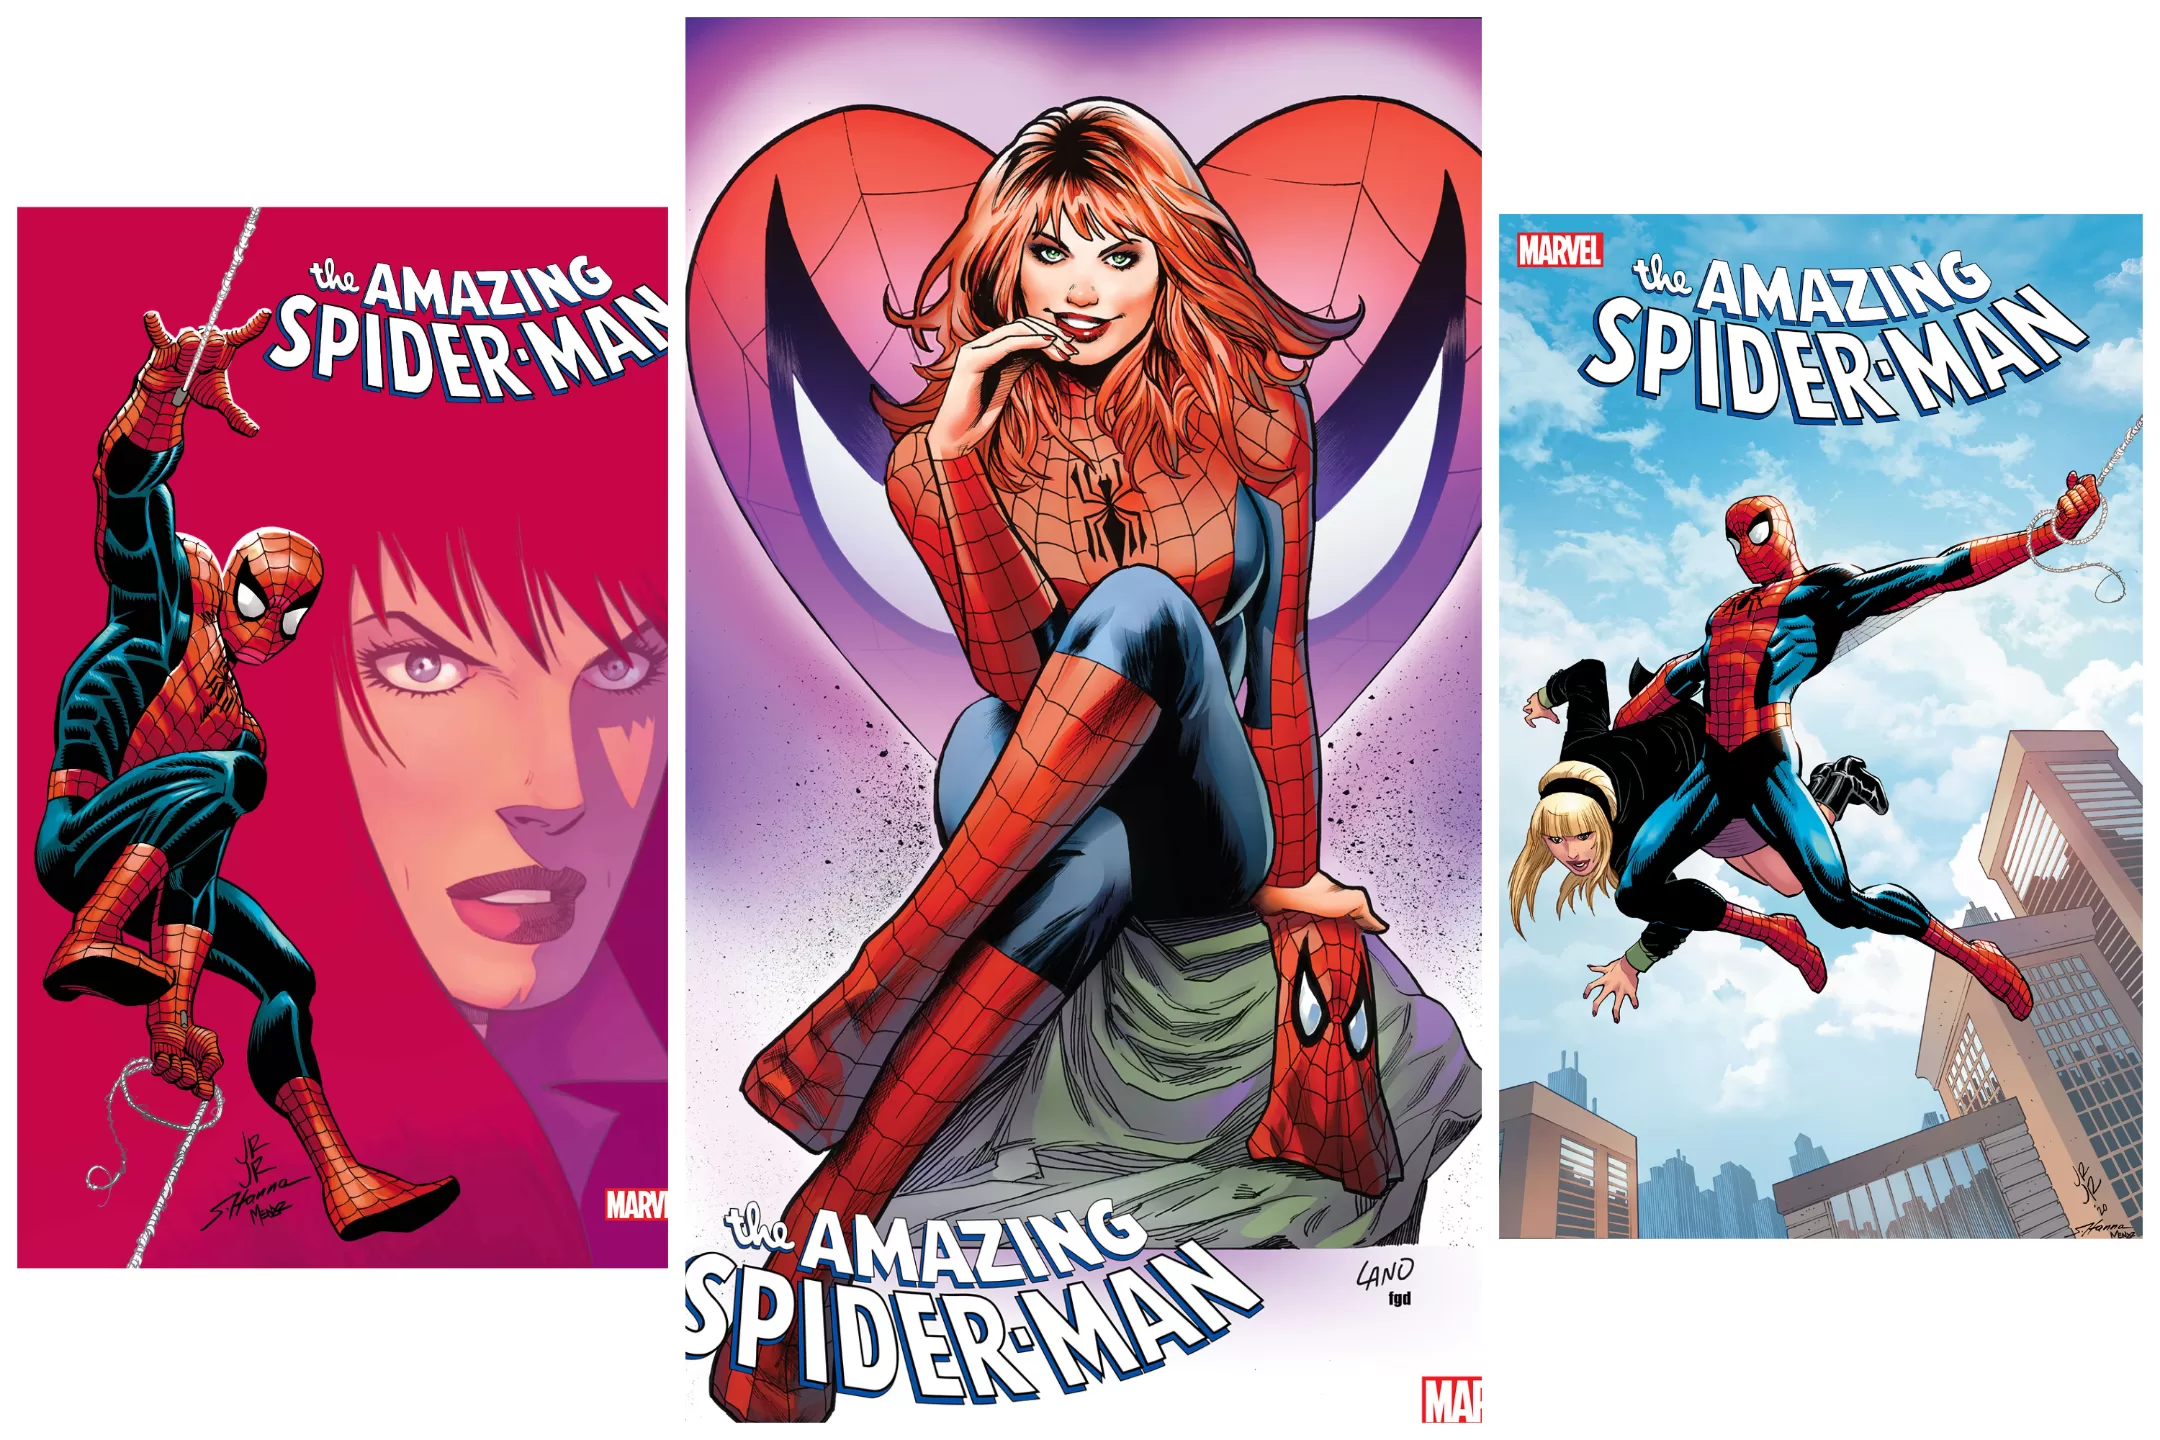 Amazing Spider-Man #25 Covers Hint at What happened between Peter and MJ |  The Workprint